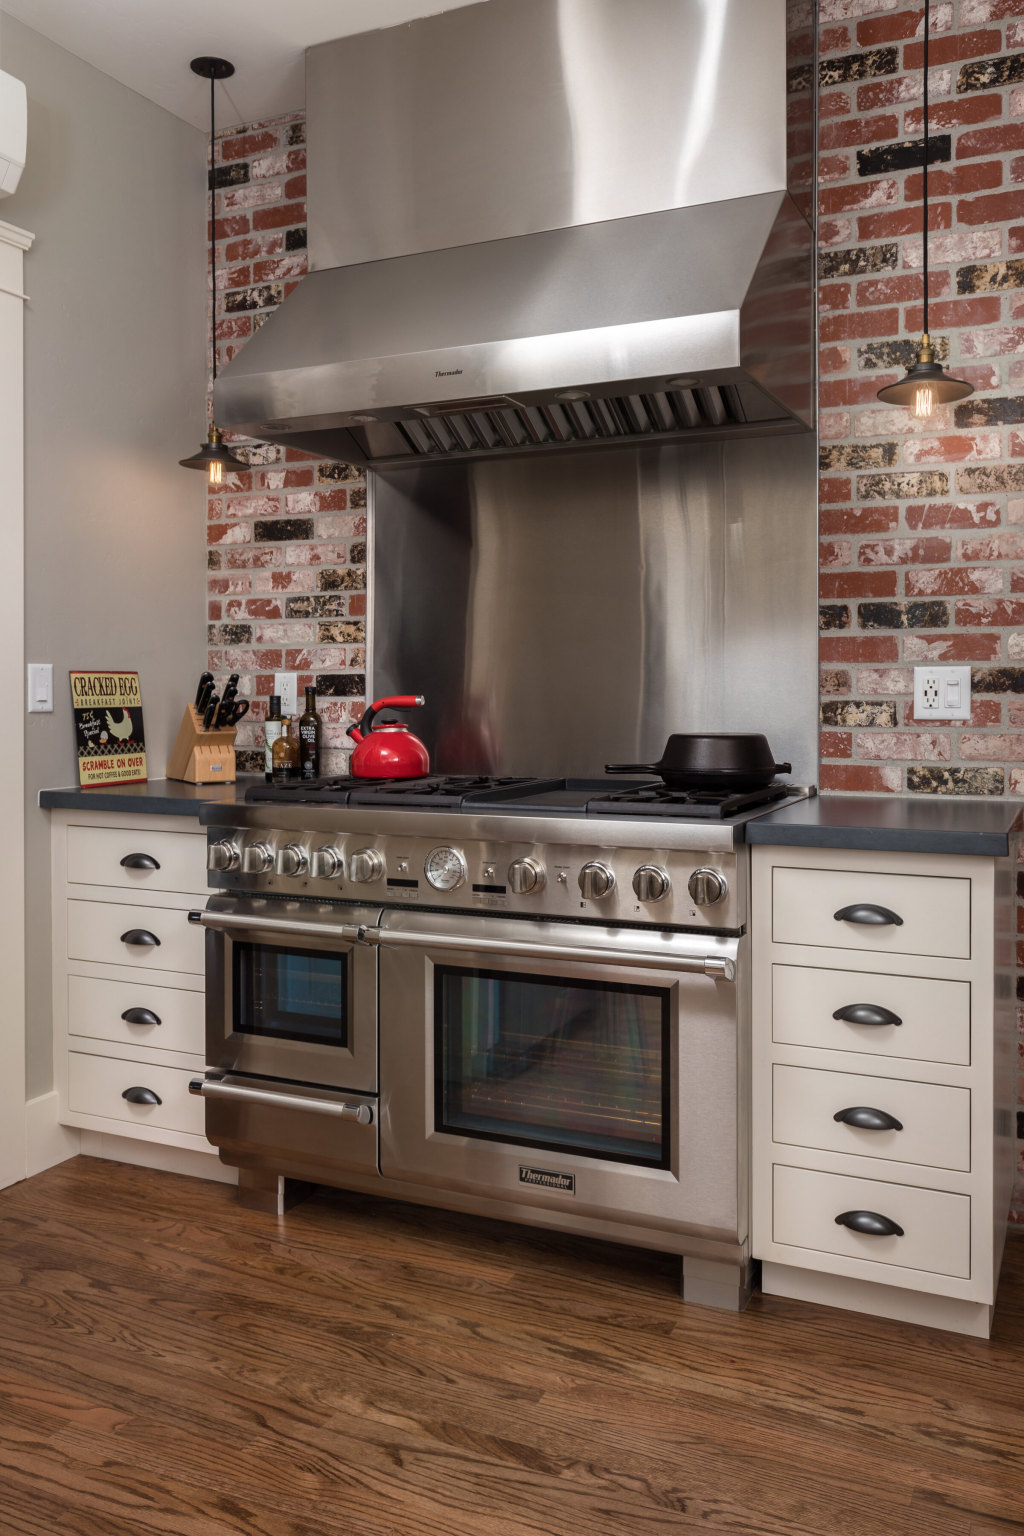 Large silver stove and oven combo with a brick wall